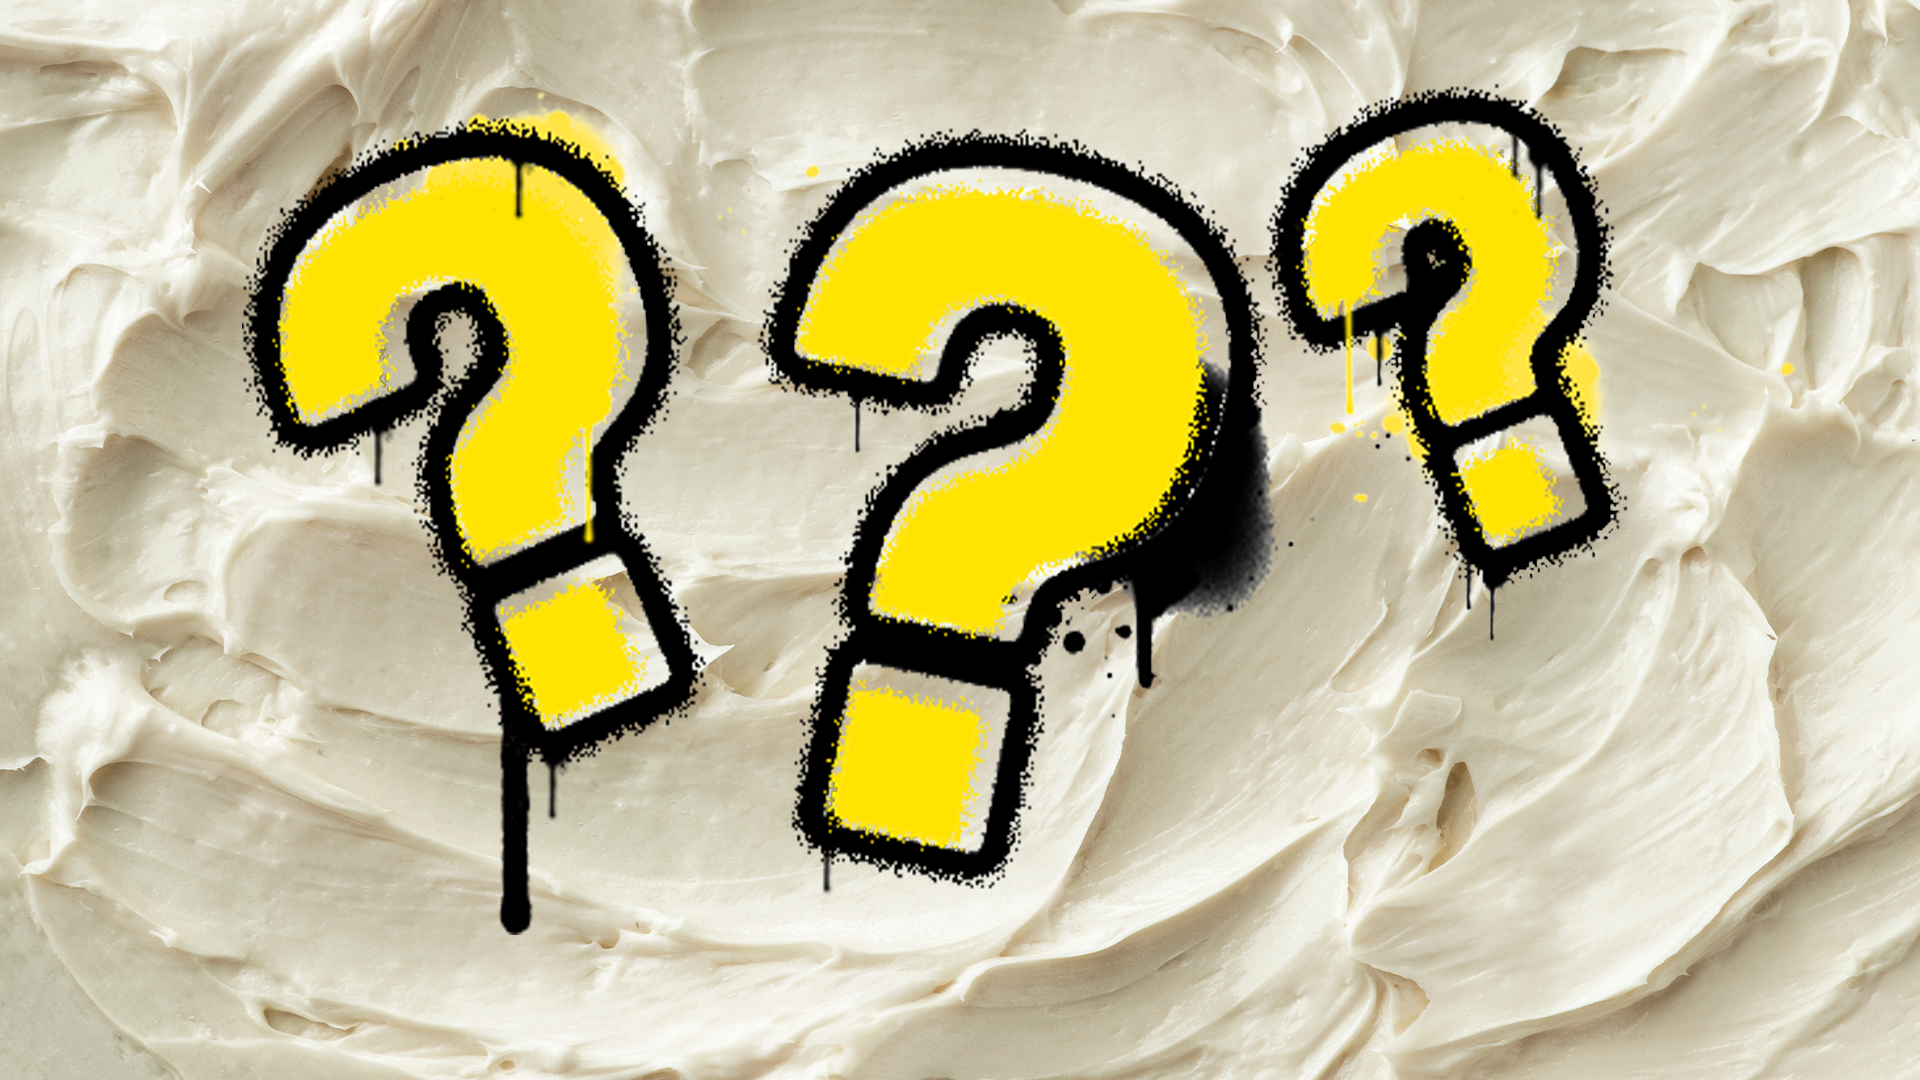 Icing with question marks